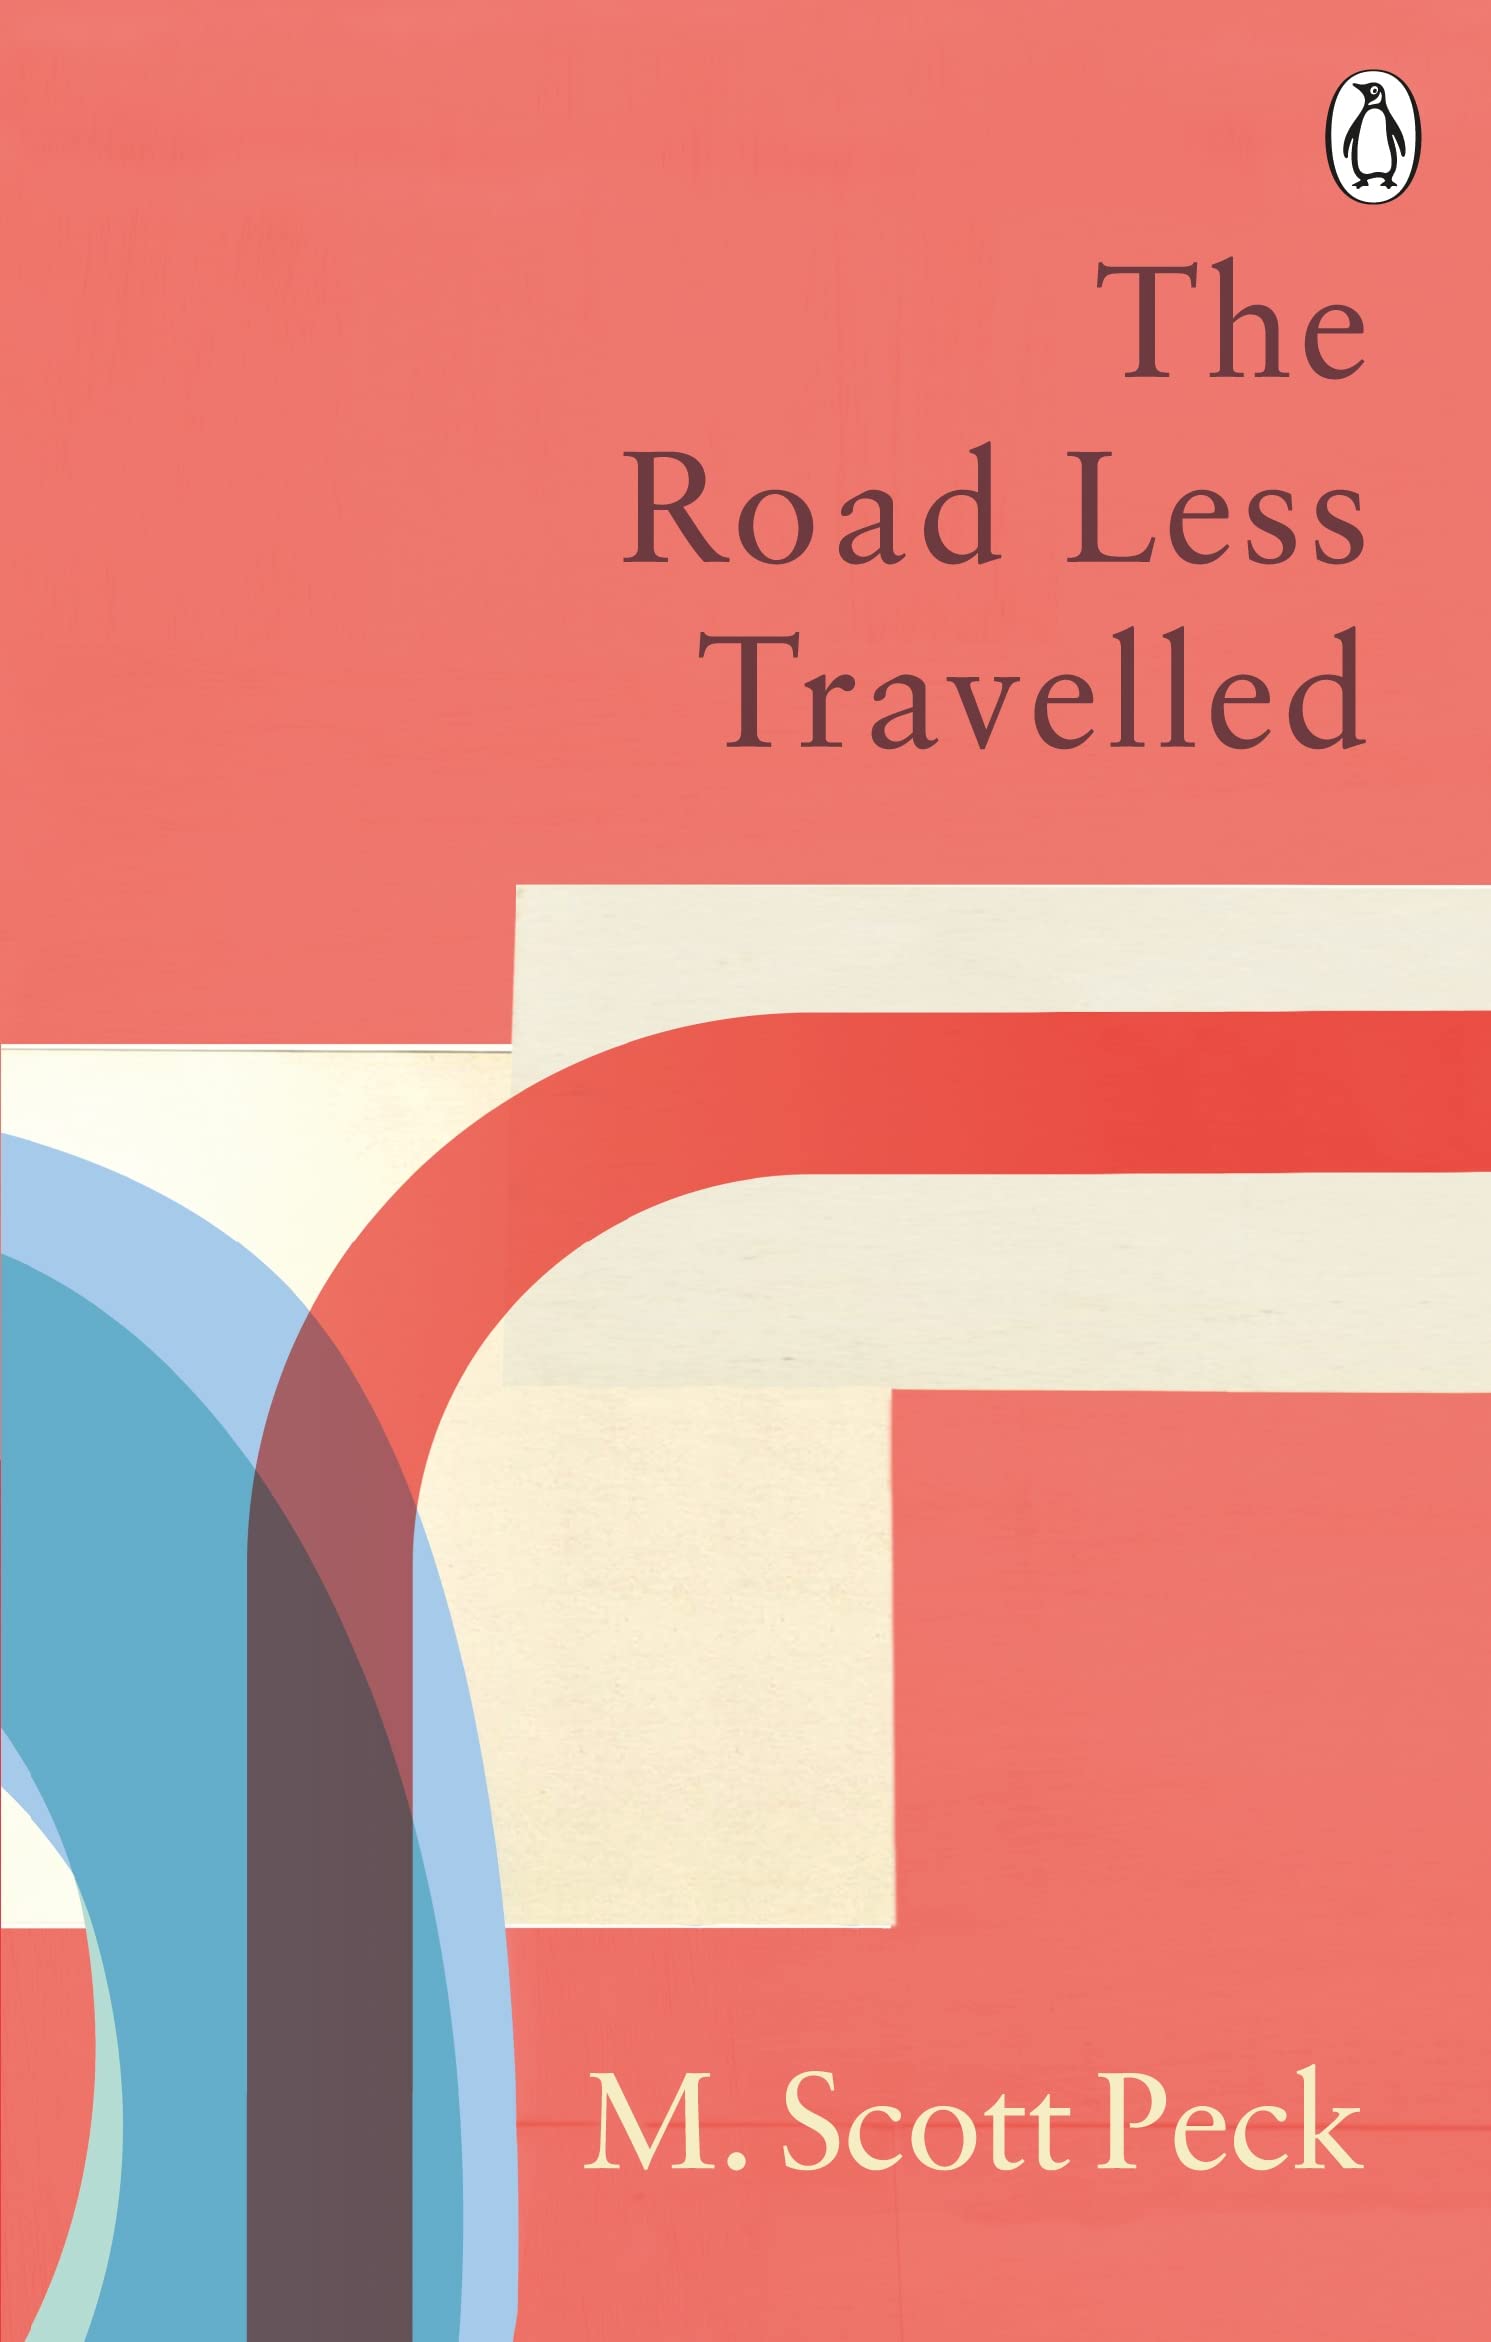 The road less travelled by M. Scott Peck